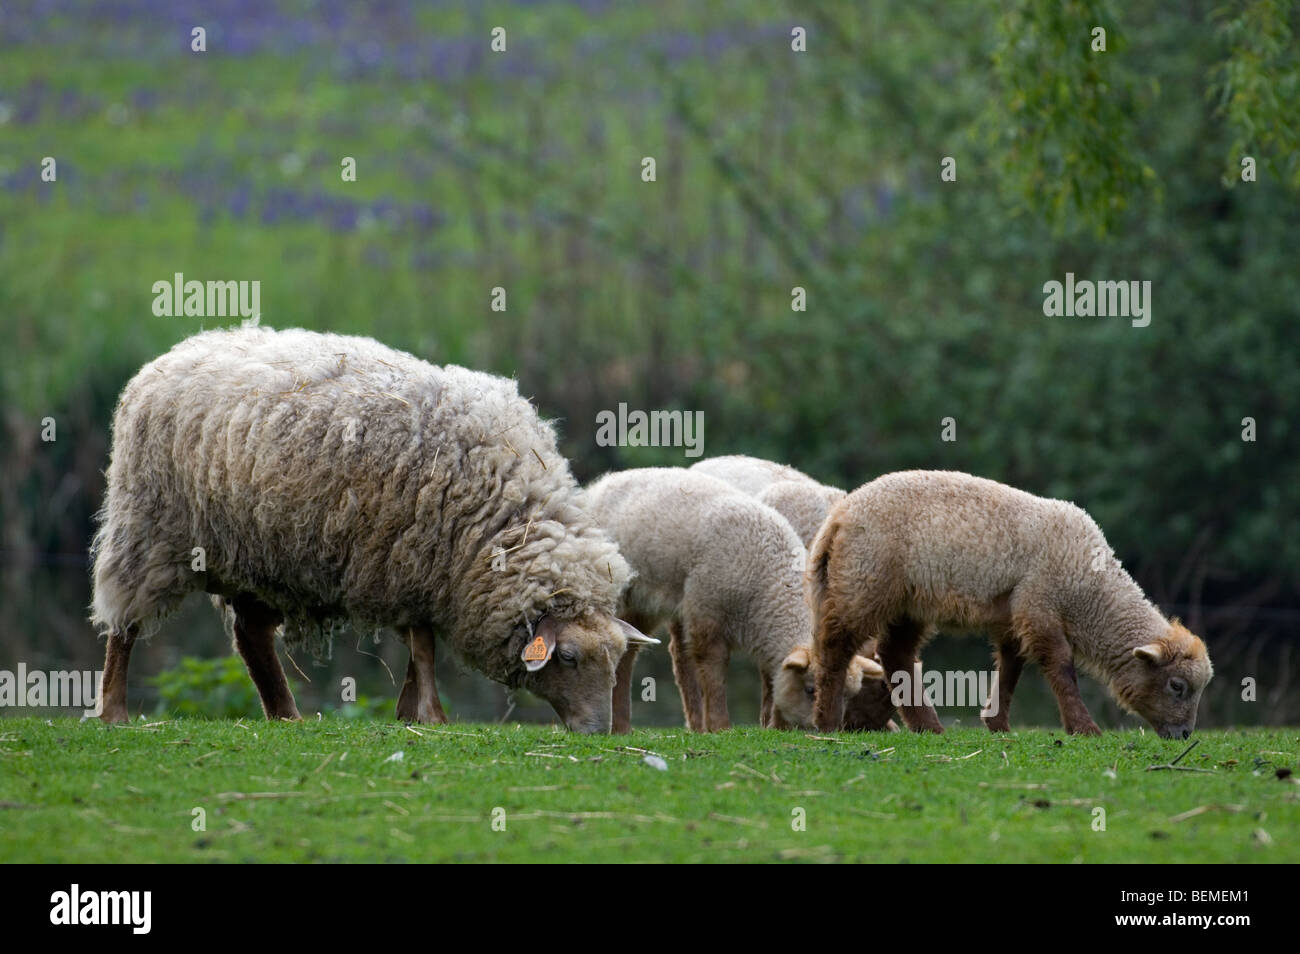 The Belgian breed of sheep Lakens sheep (Ovis aries) with lambs, Belgium Stock Photo